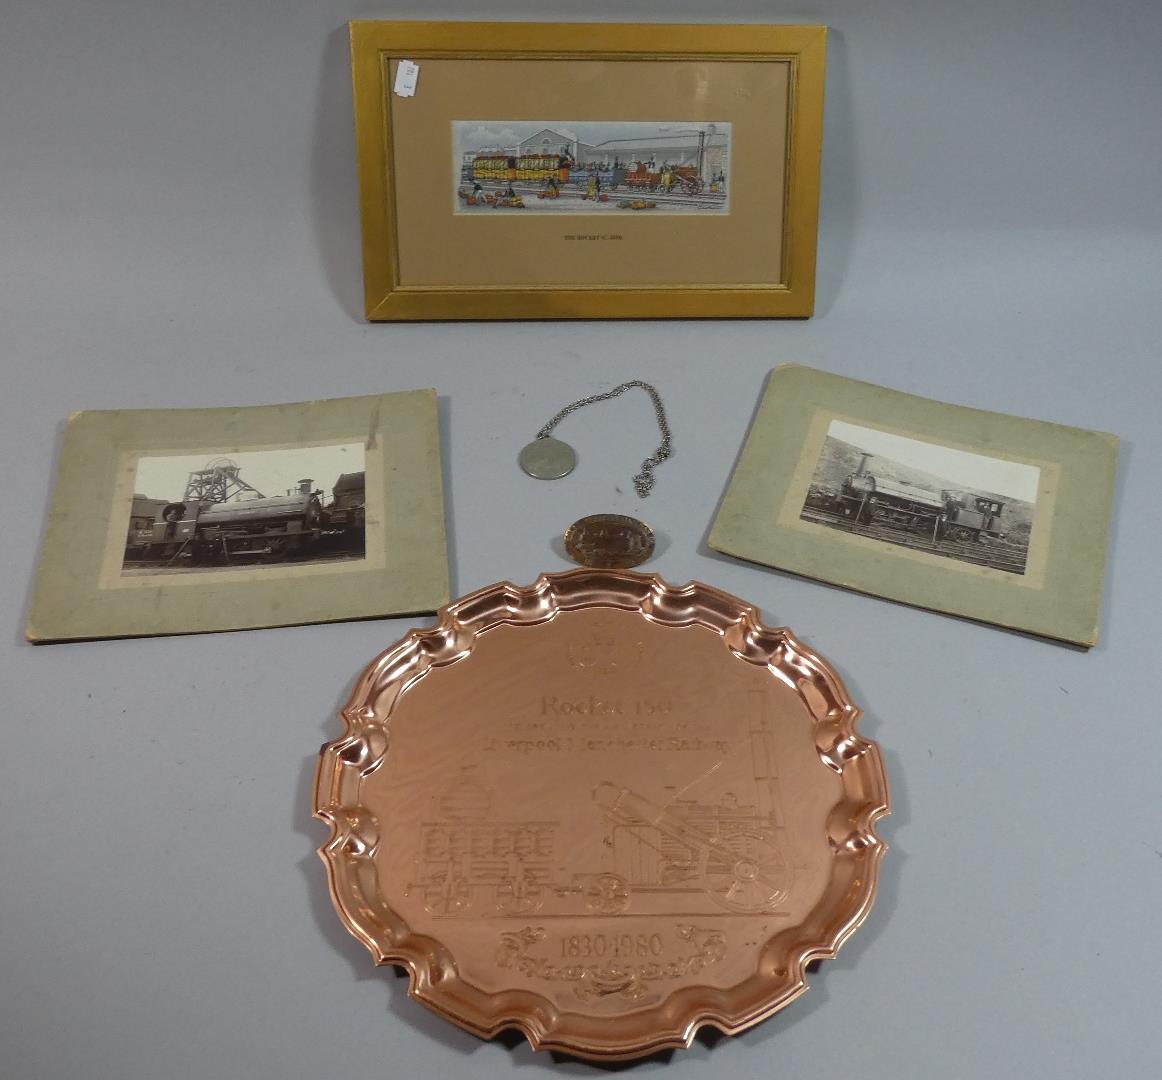 A Framed Cash's Silk, The Rocket Together with Two Mounted Photographs of Railway Locomotives,